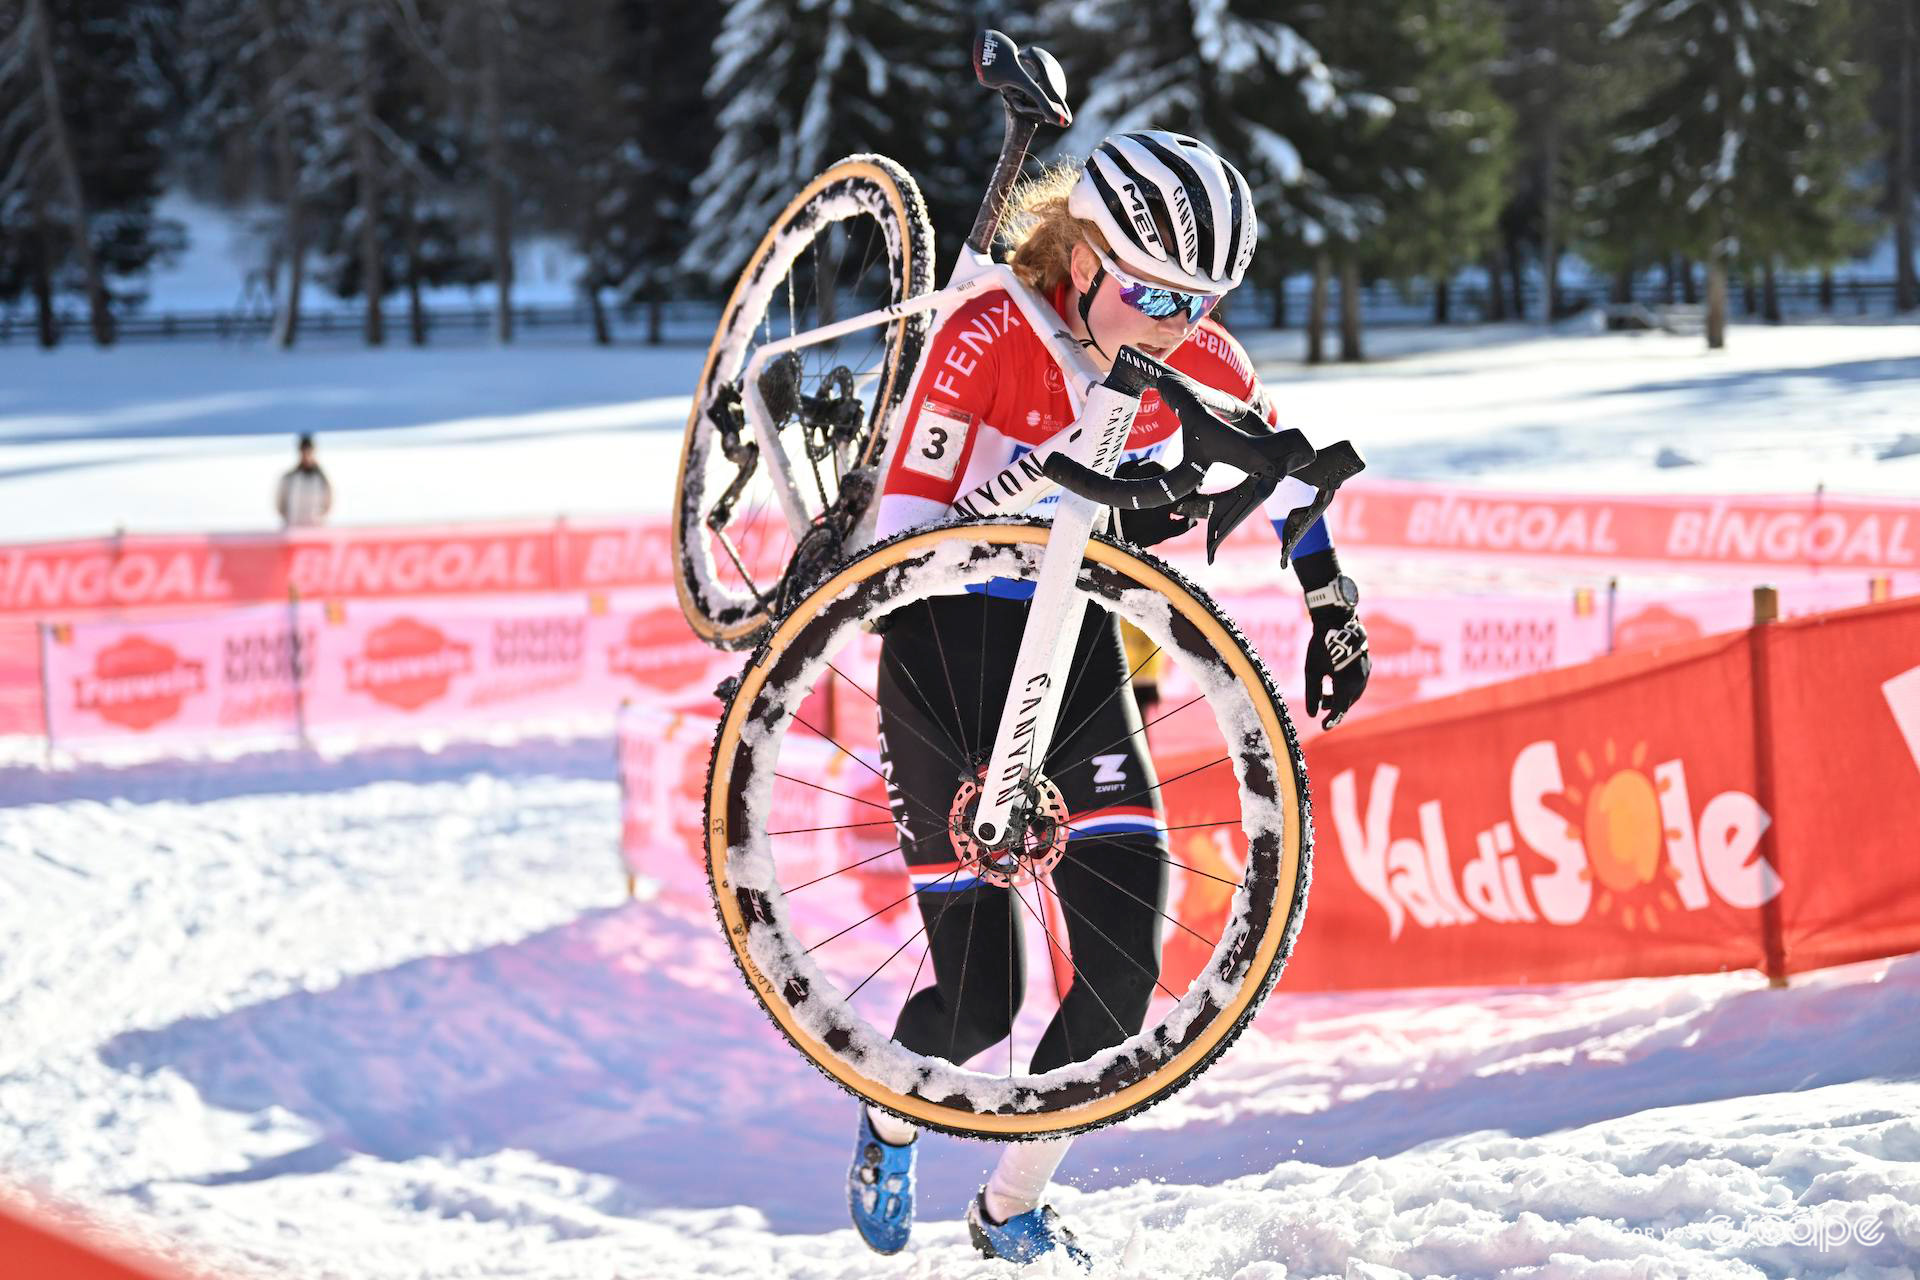 Dutch national champion Puck Pieterse carries her bike as she runs over the snow during UCI Cyclocross World Cup Val di Sole.